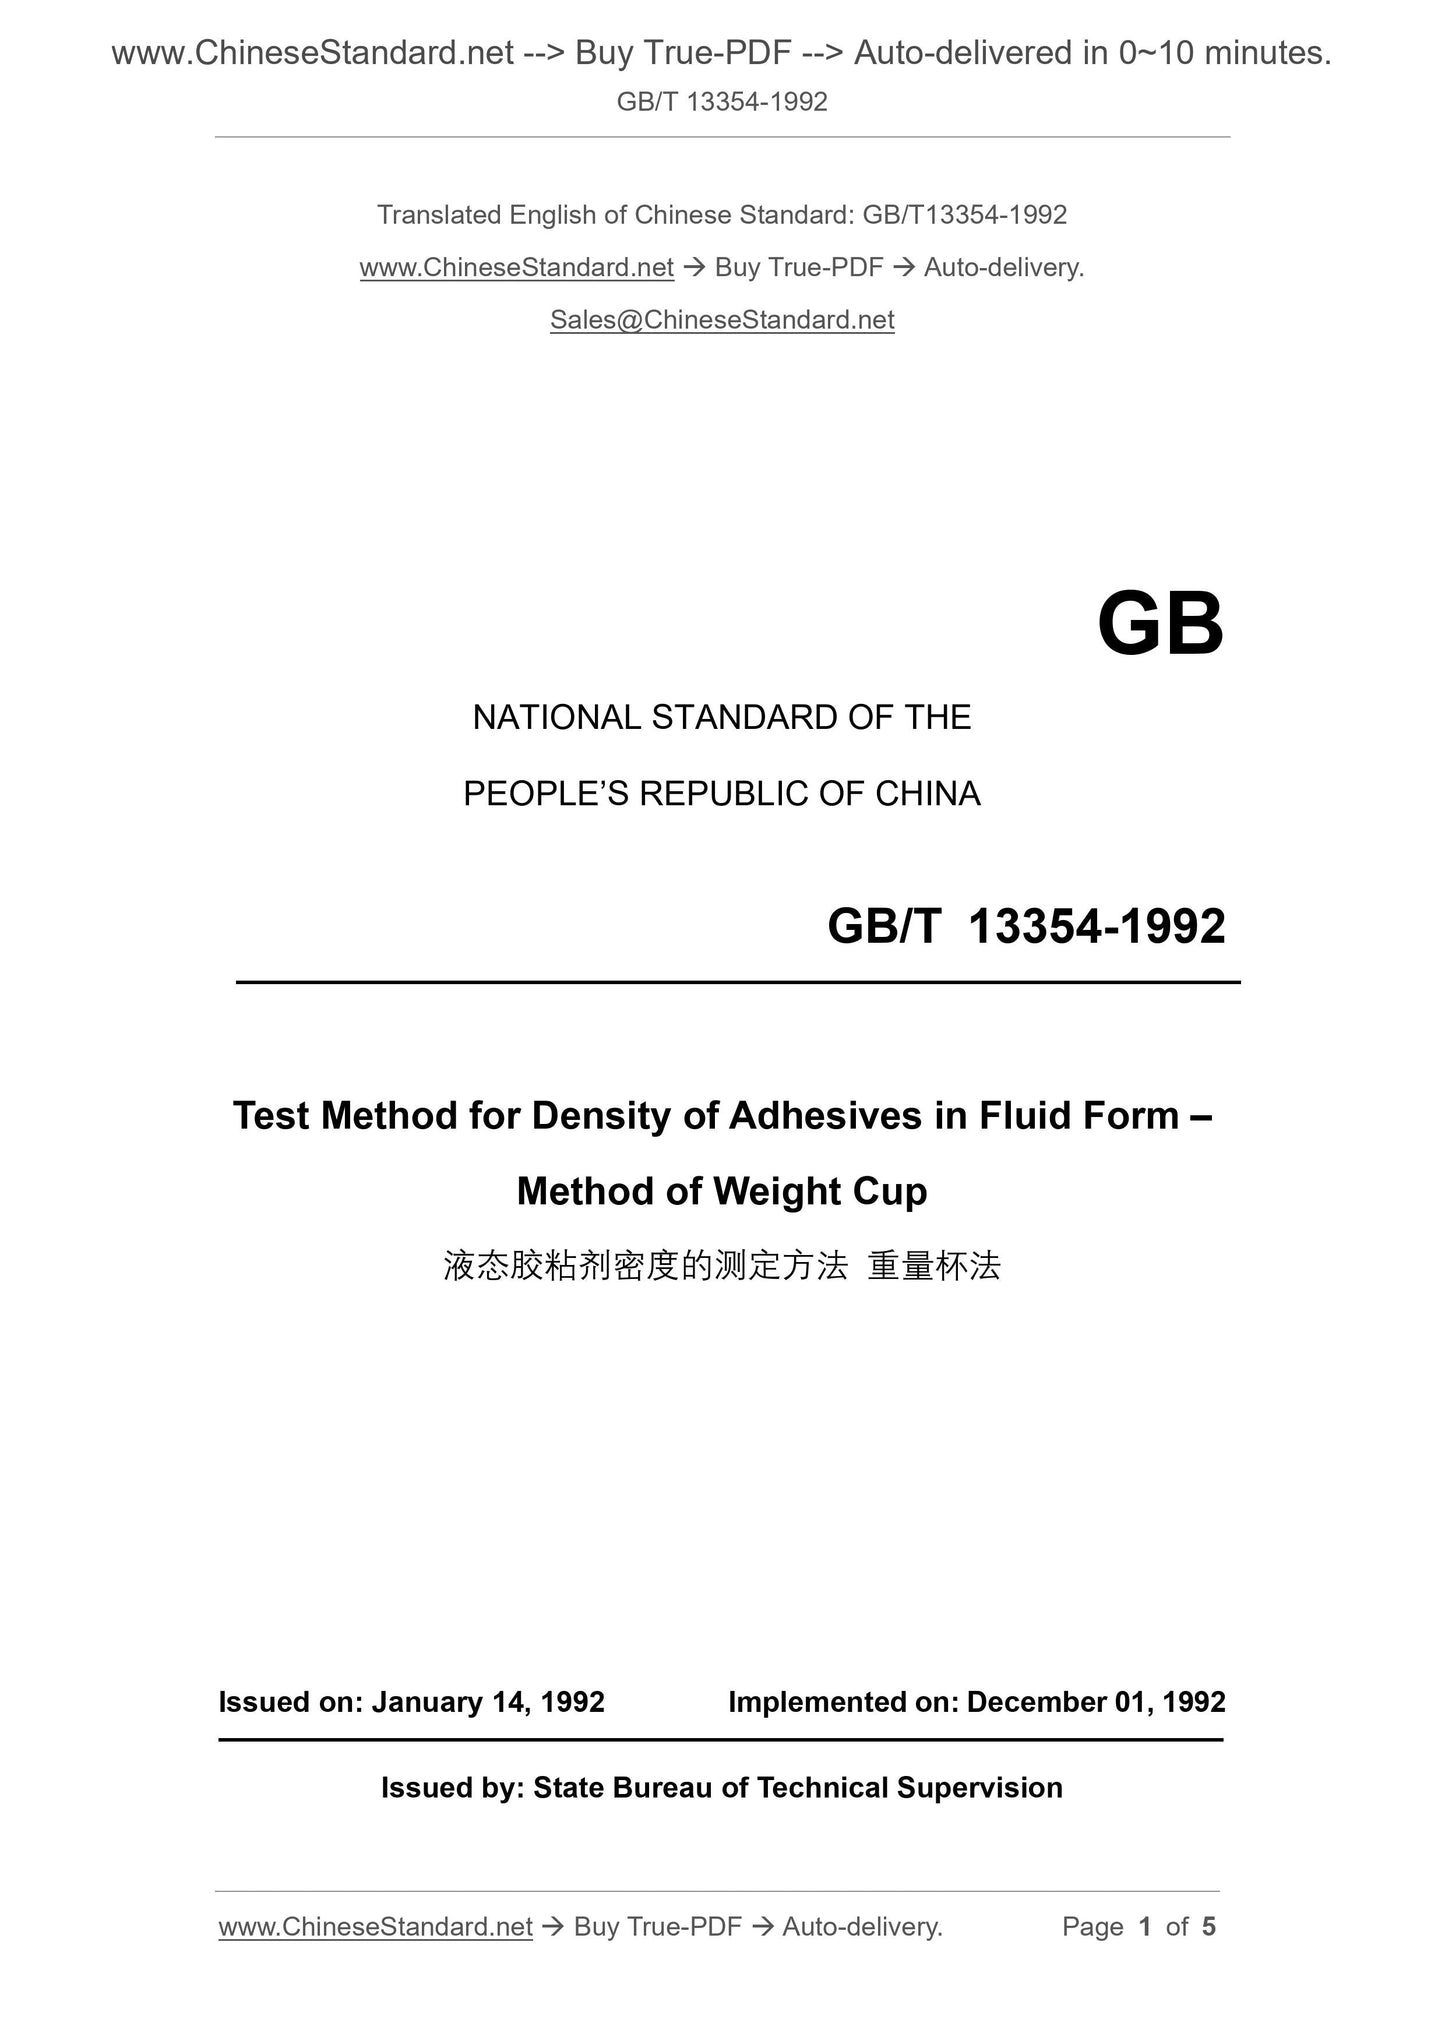 GB/T 13354-1992 Page 1